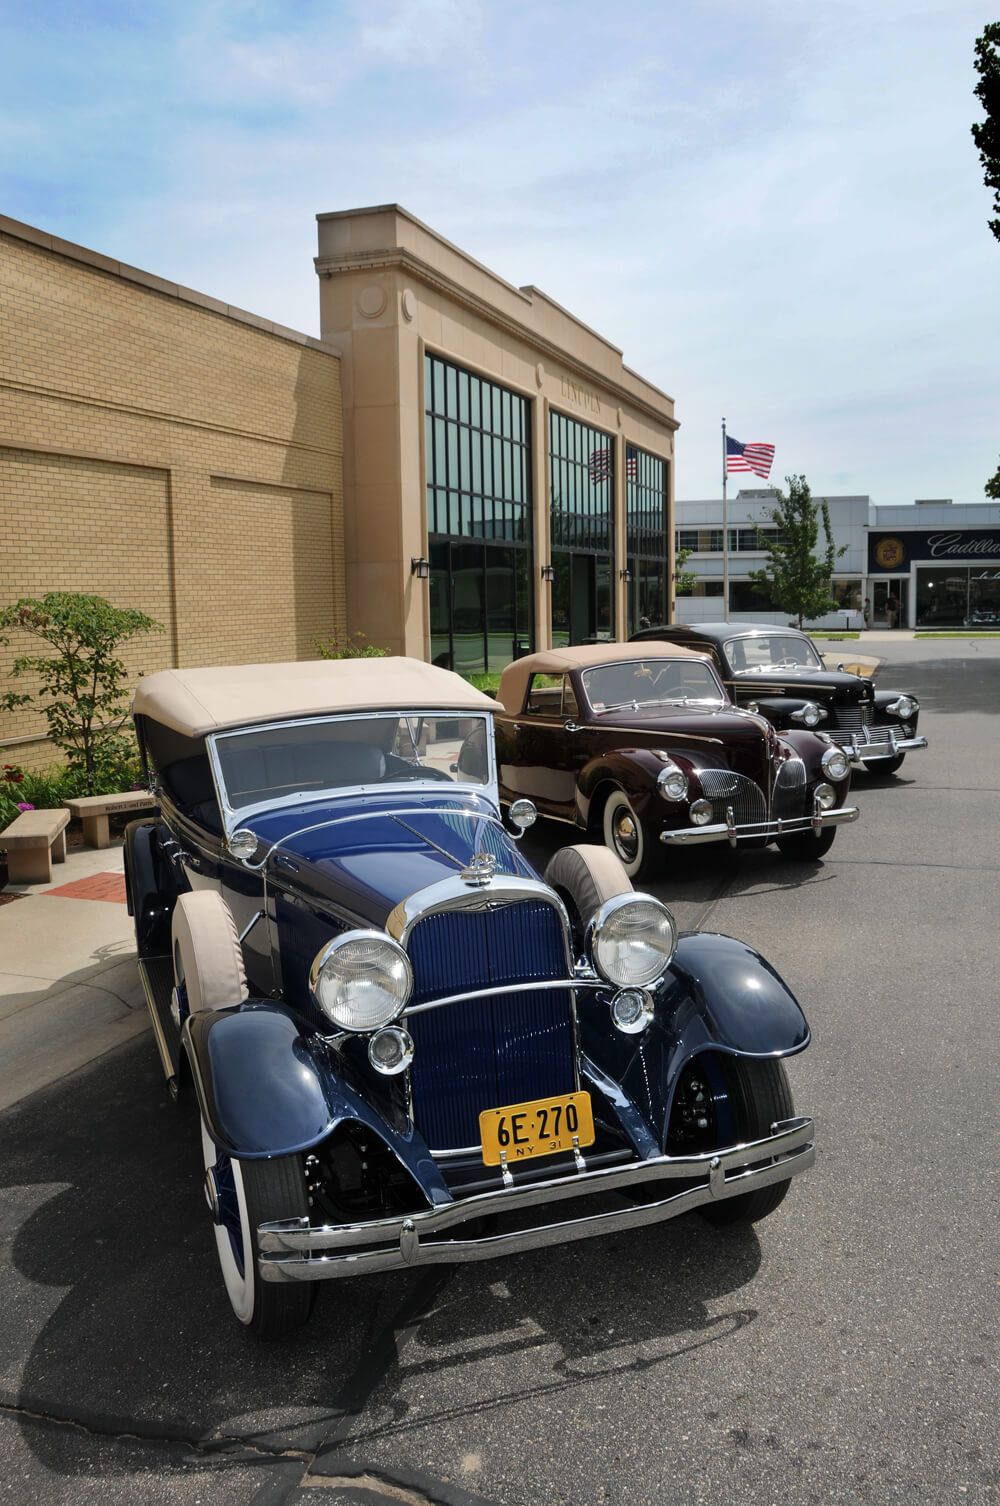 Three Lincolns were recently donated to the Lincoln Motor Car Foundation